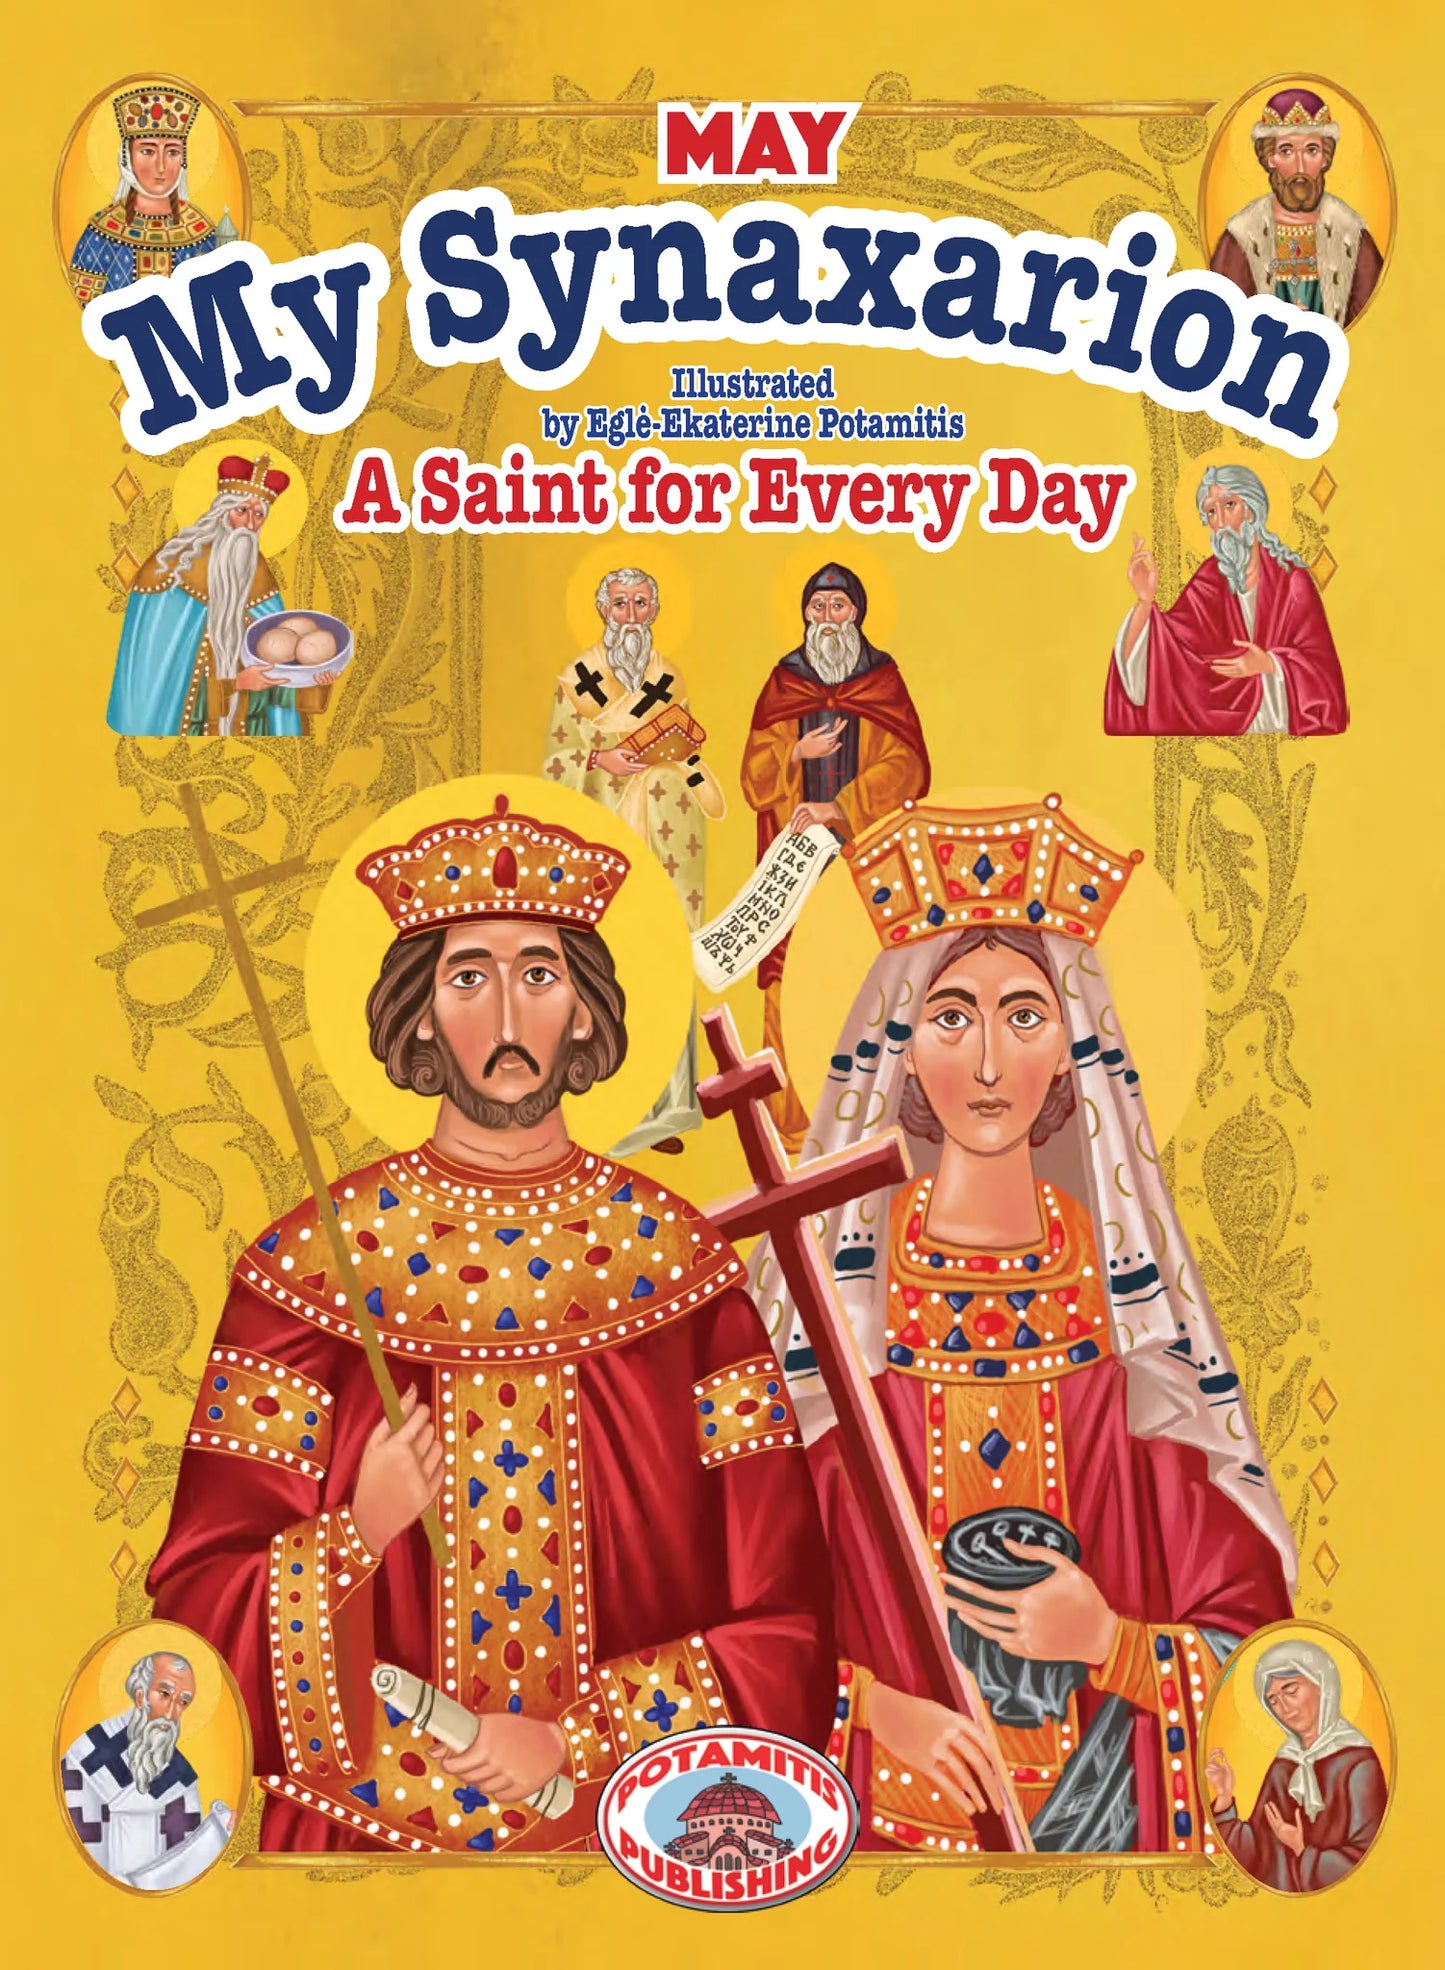 My Synaxarion - A Saint for Every Day [May]